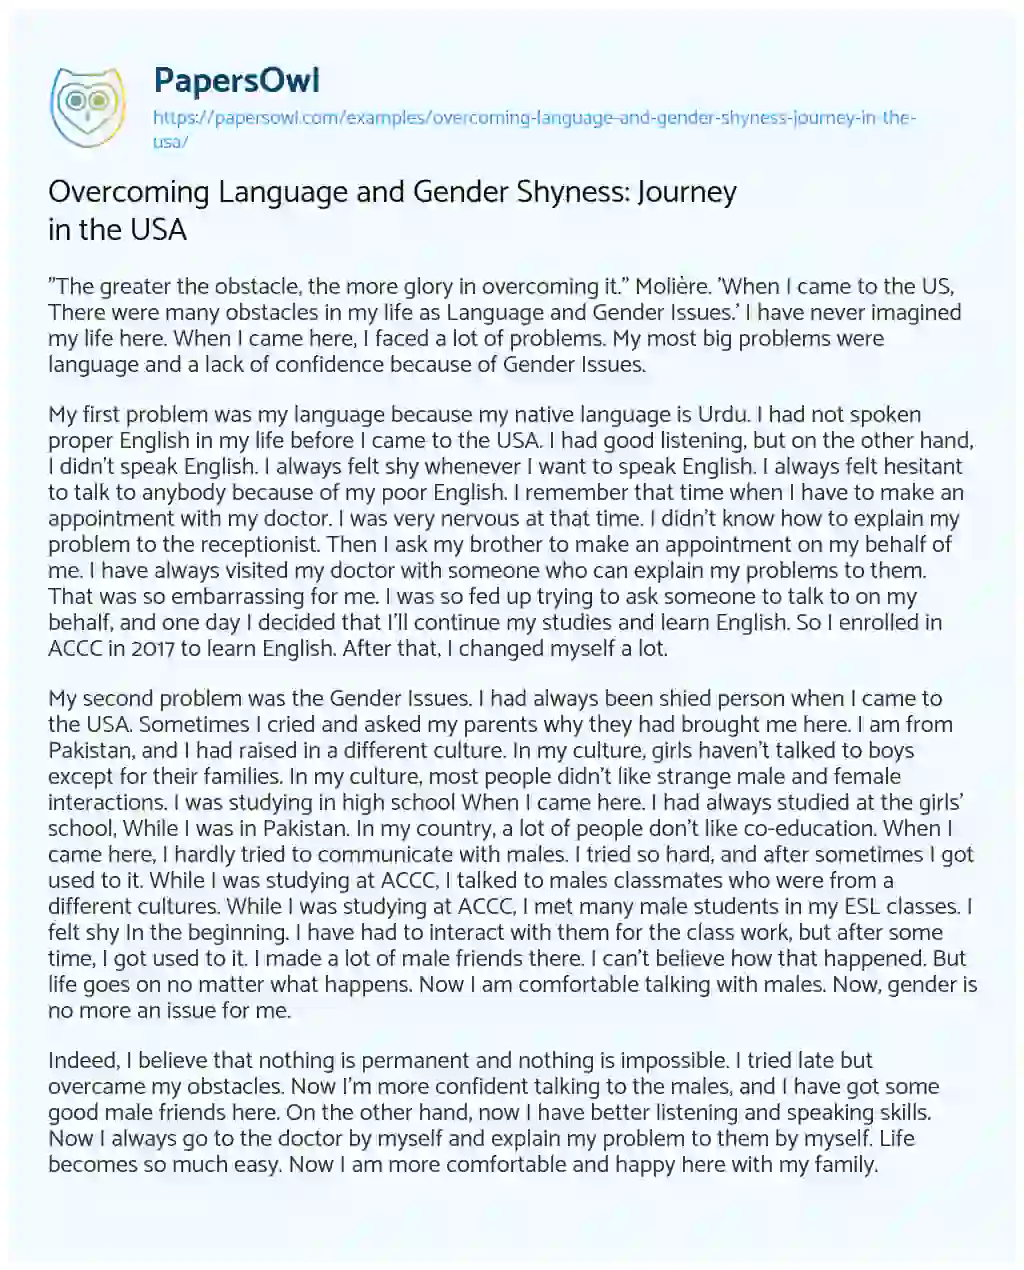 Essay on Overcoming Language and Gender Shyness: Journey in the USA